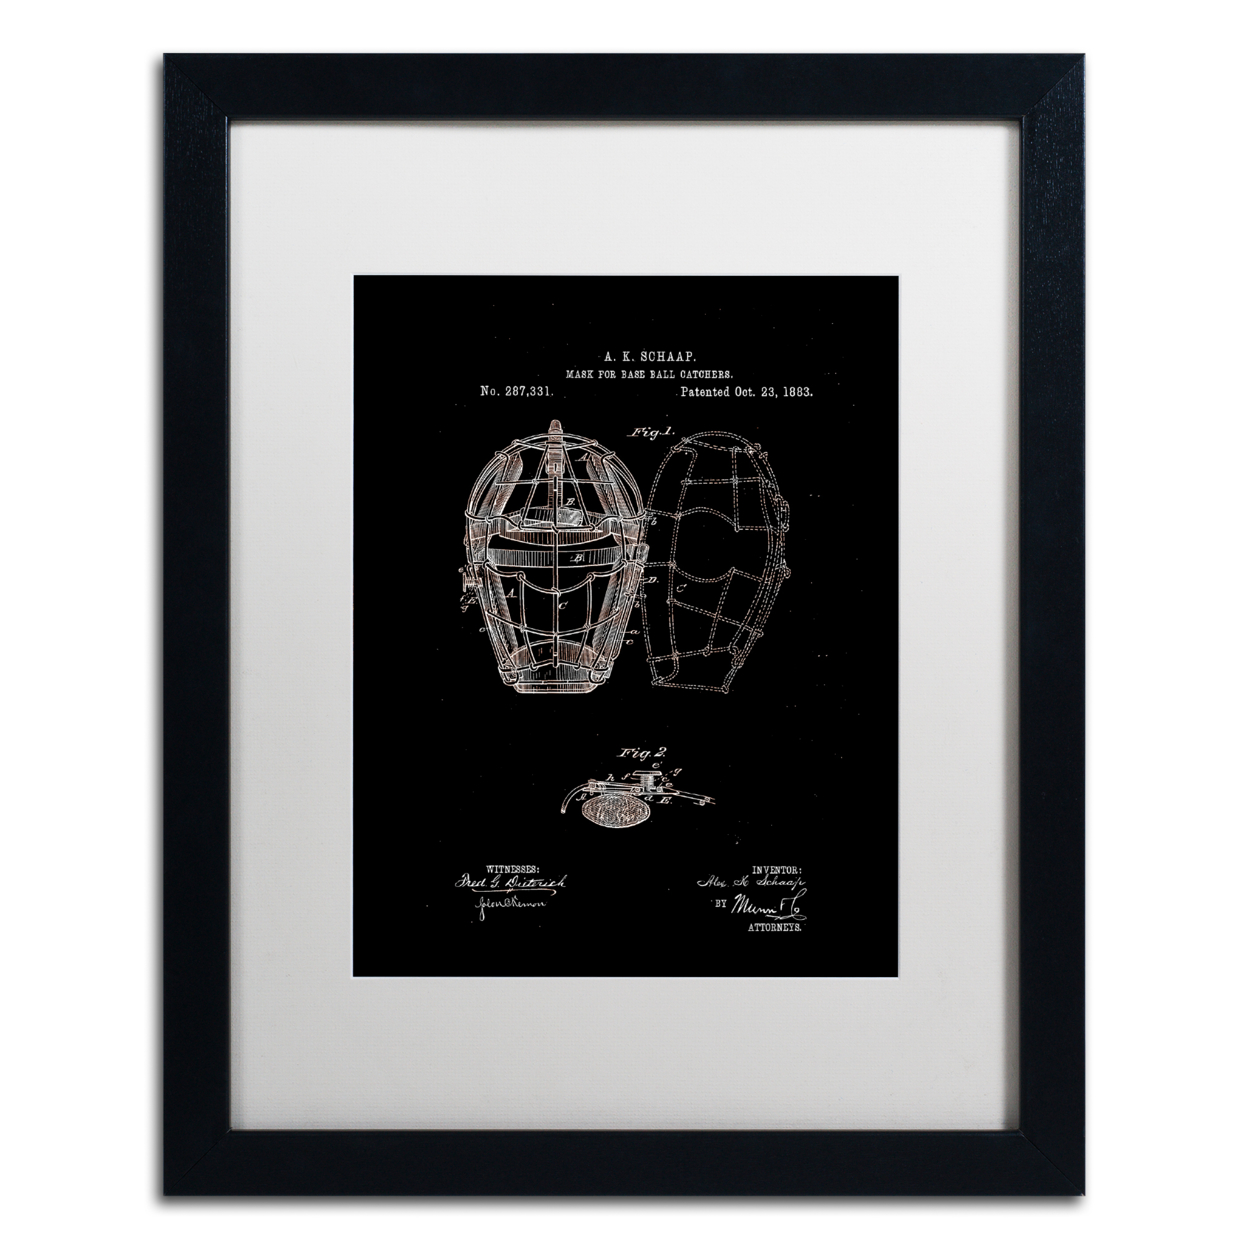 Claire Doherty 'Catcher's Mask Patent 1883 Black' Black Wooden Framed Art 18 X 22 Inches